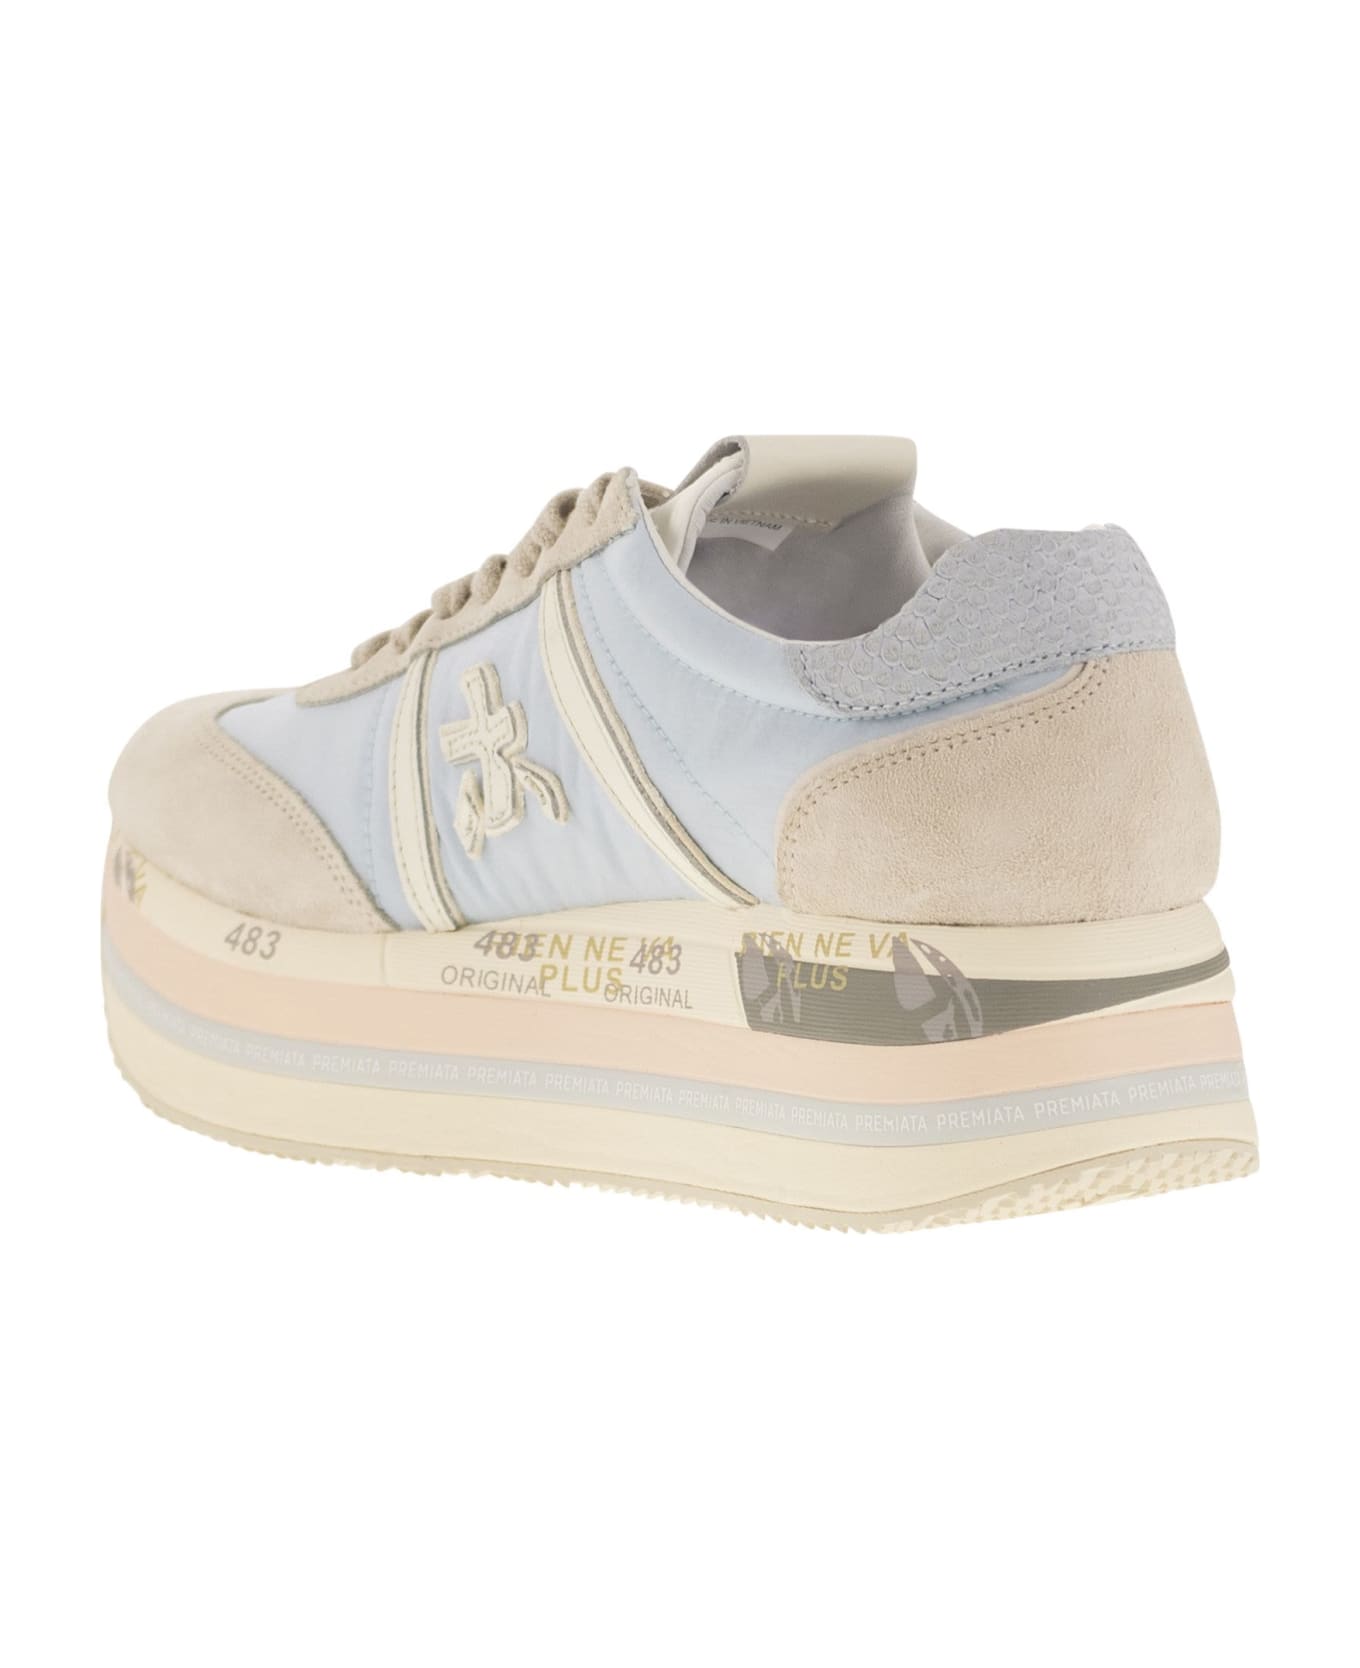 Premiata Beth Sneakers In Beige Suede And Fabric - White/light Blue